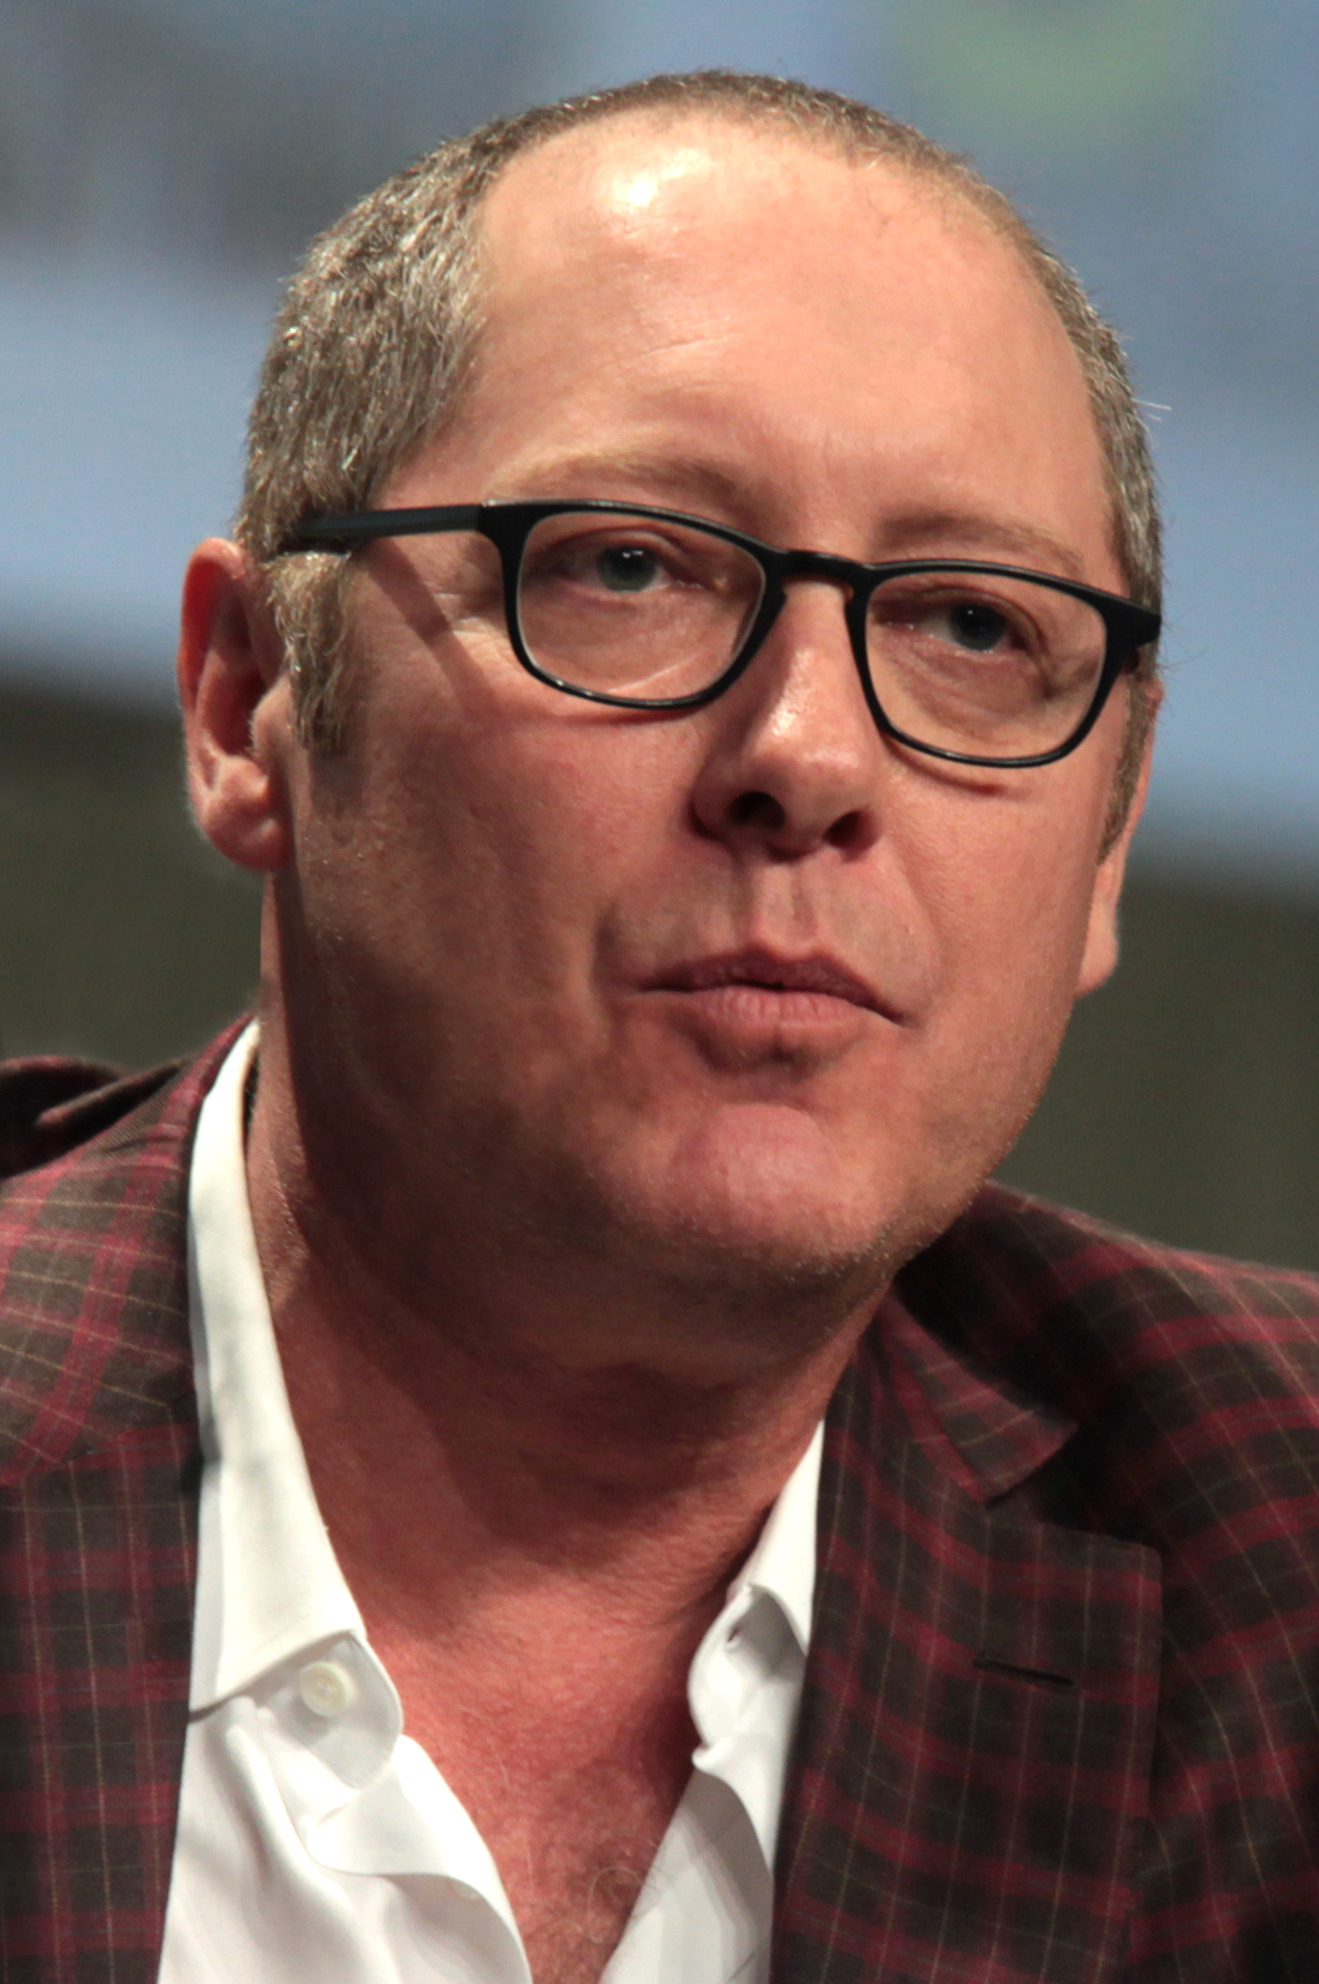 Spader at the 2014 [[San Diego Comic-Con]]